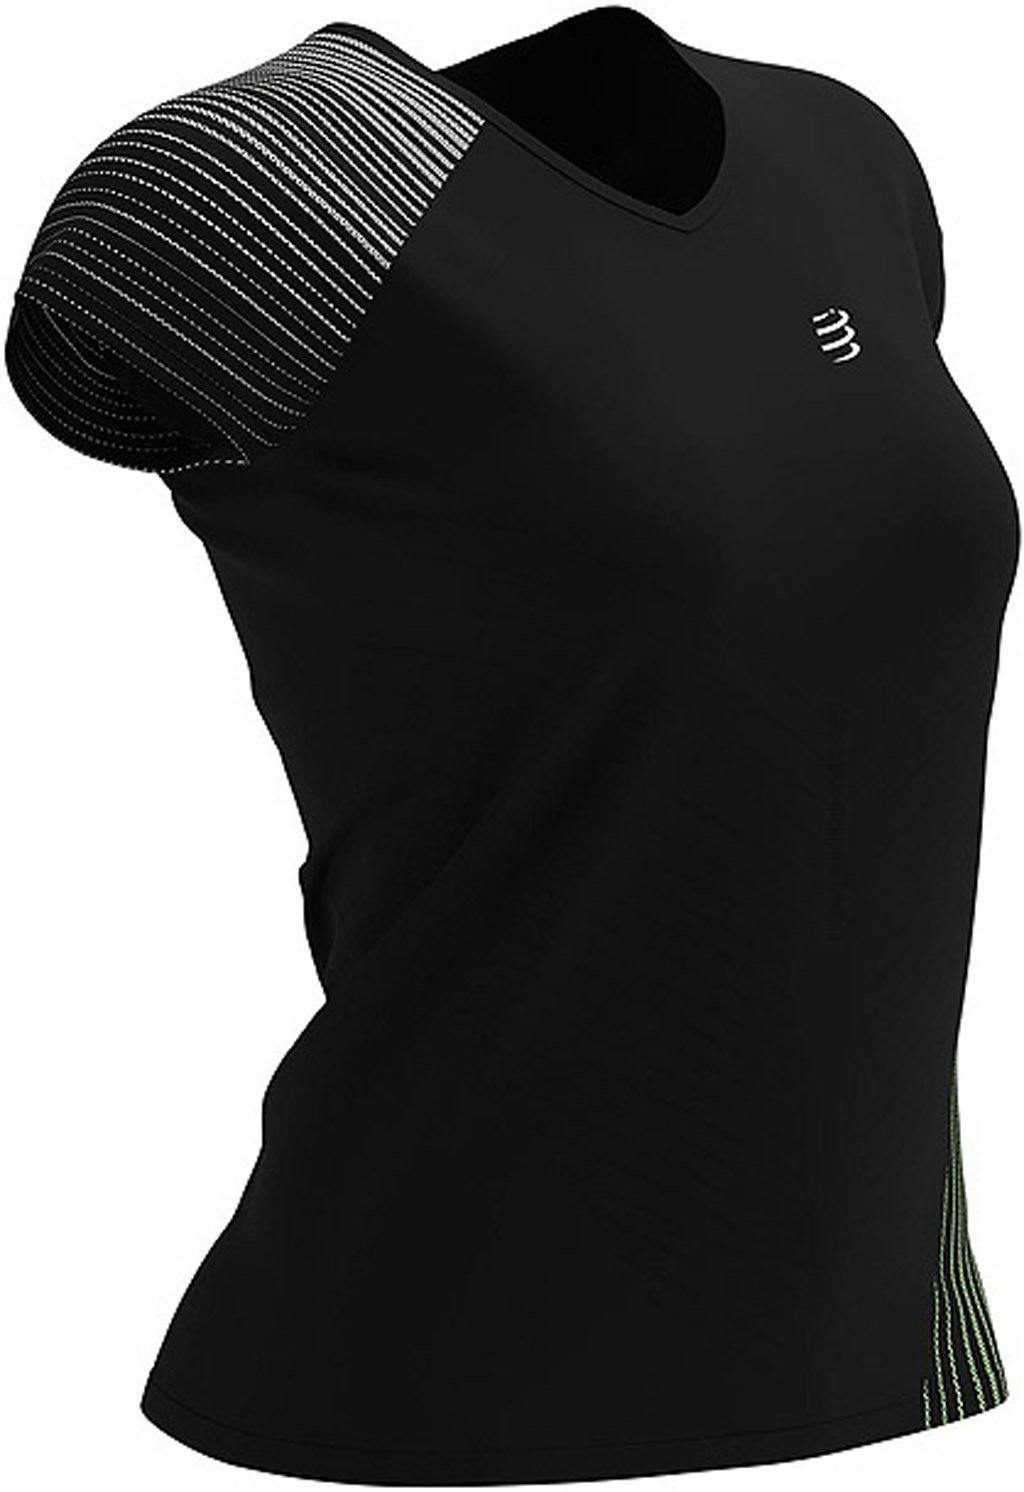 Product image for Performance Short Sleeve Tee - Women's